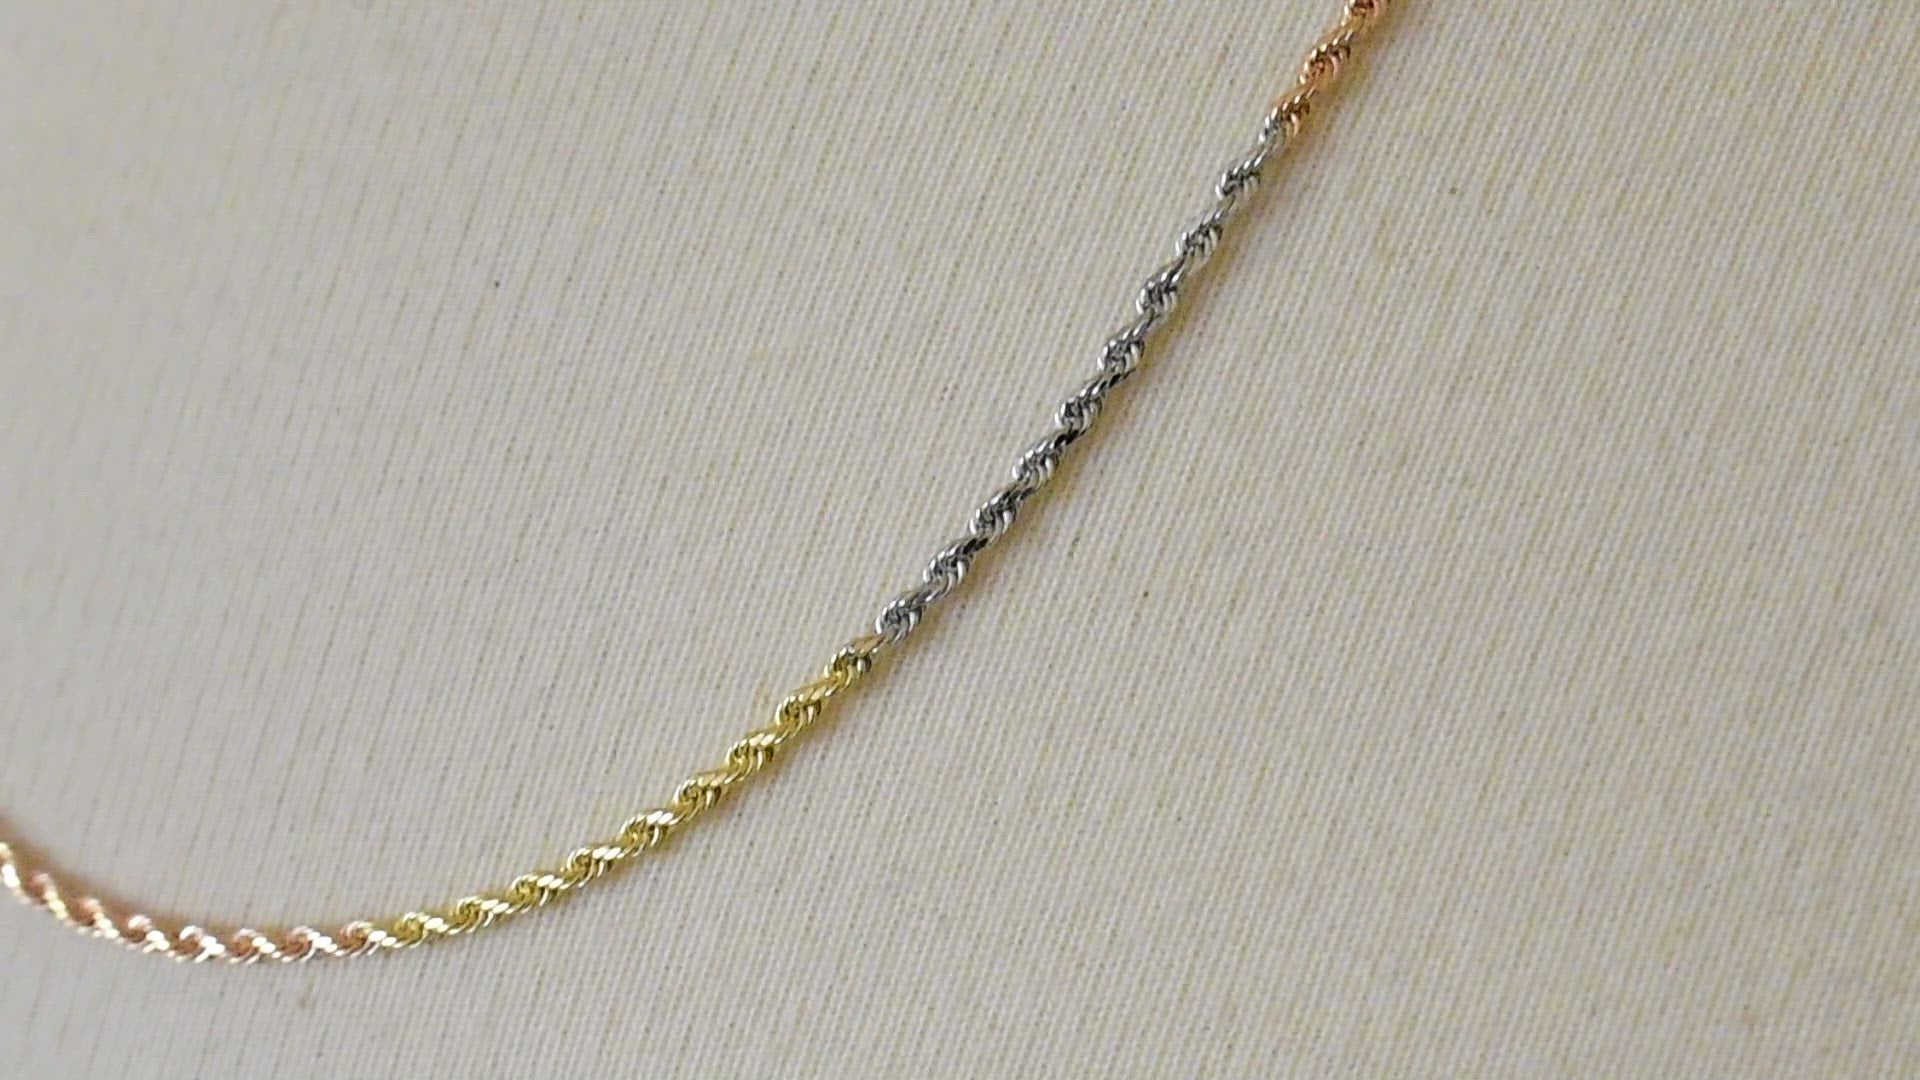 14K Yellow White Rose Gold Tri Color 1.75mm Diamond Cut Rope Bracelet Anklet Choker Necklace Chain